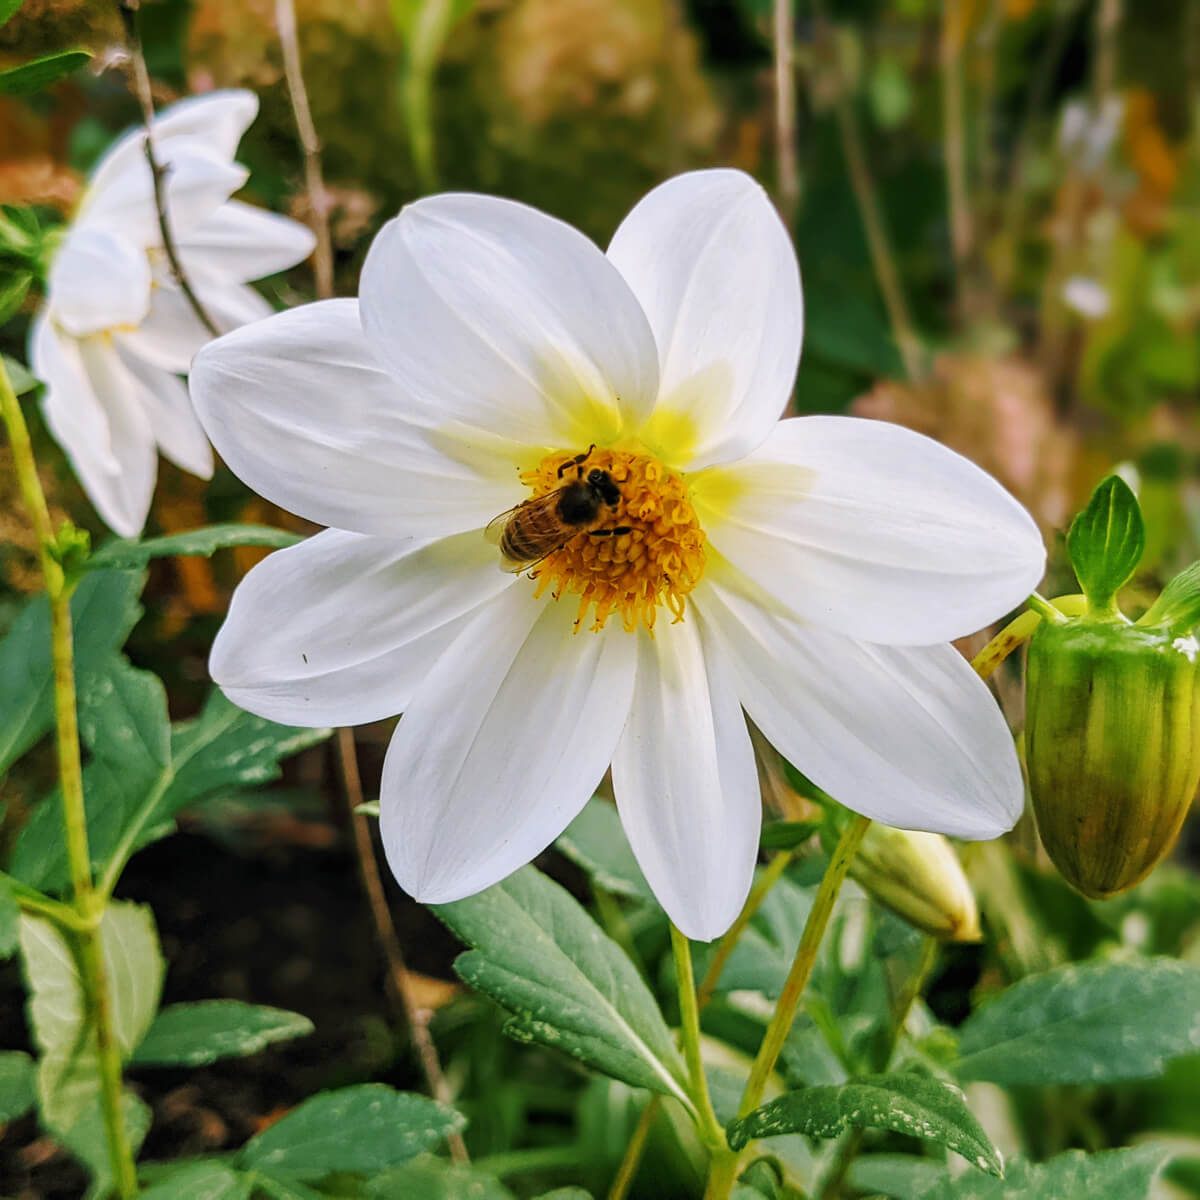 White Ribbon Dahlia started from seed indoors with a bee pollinating it